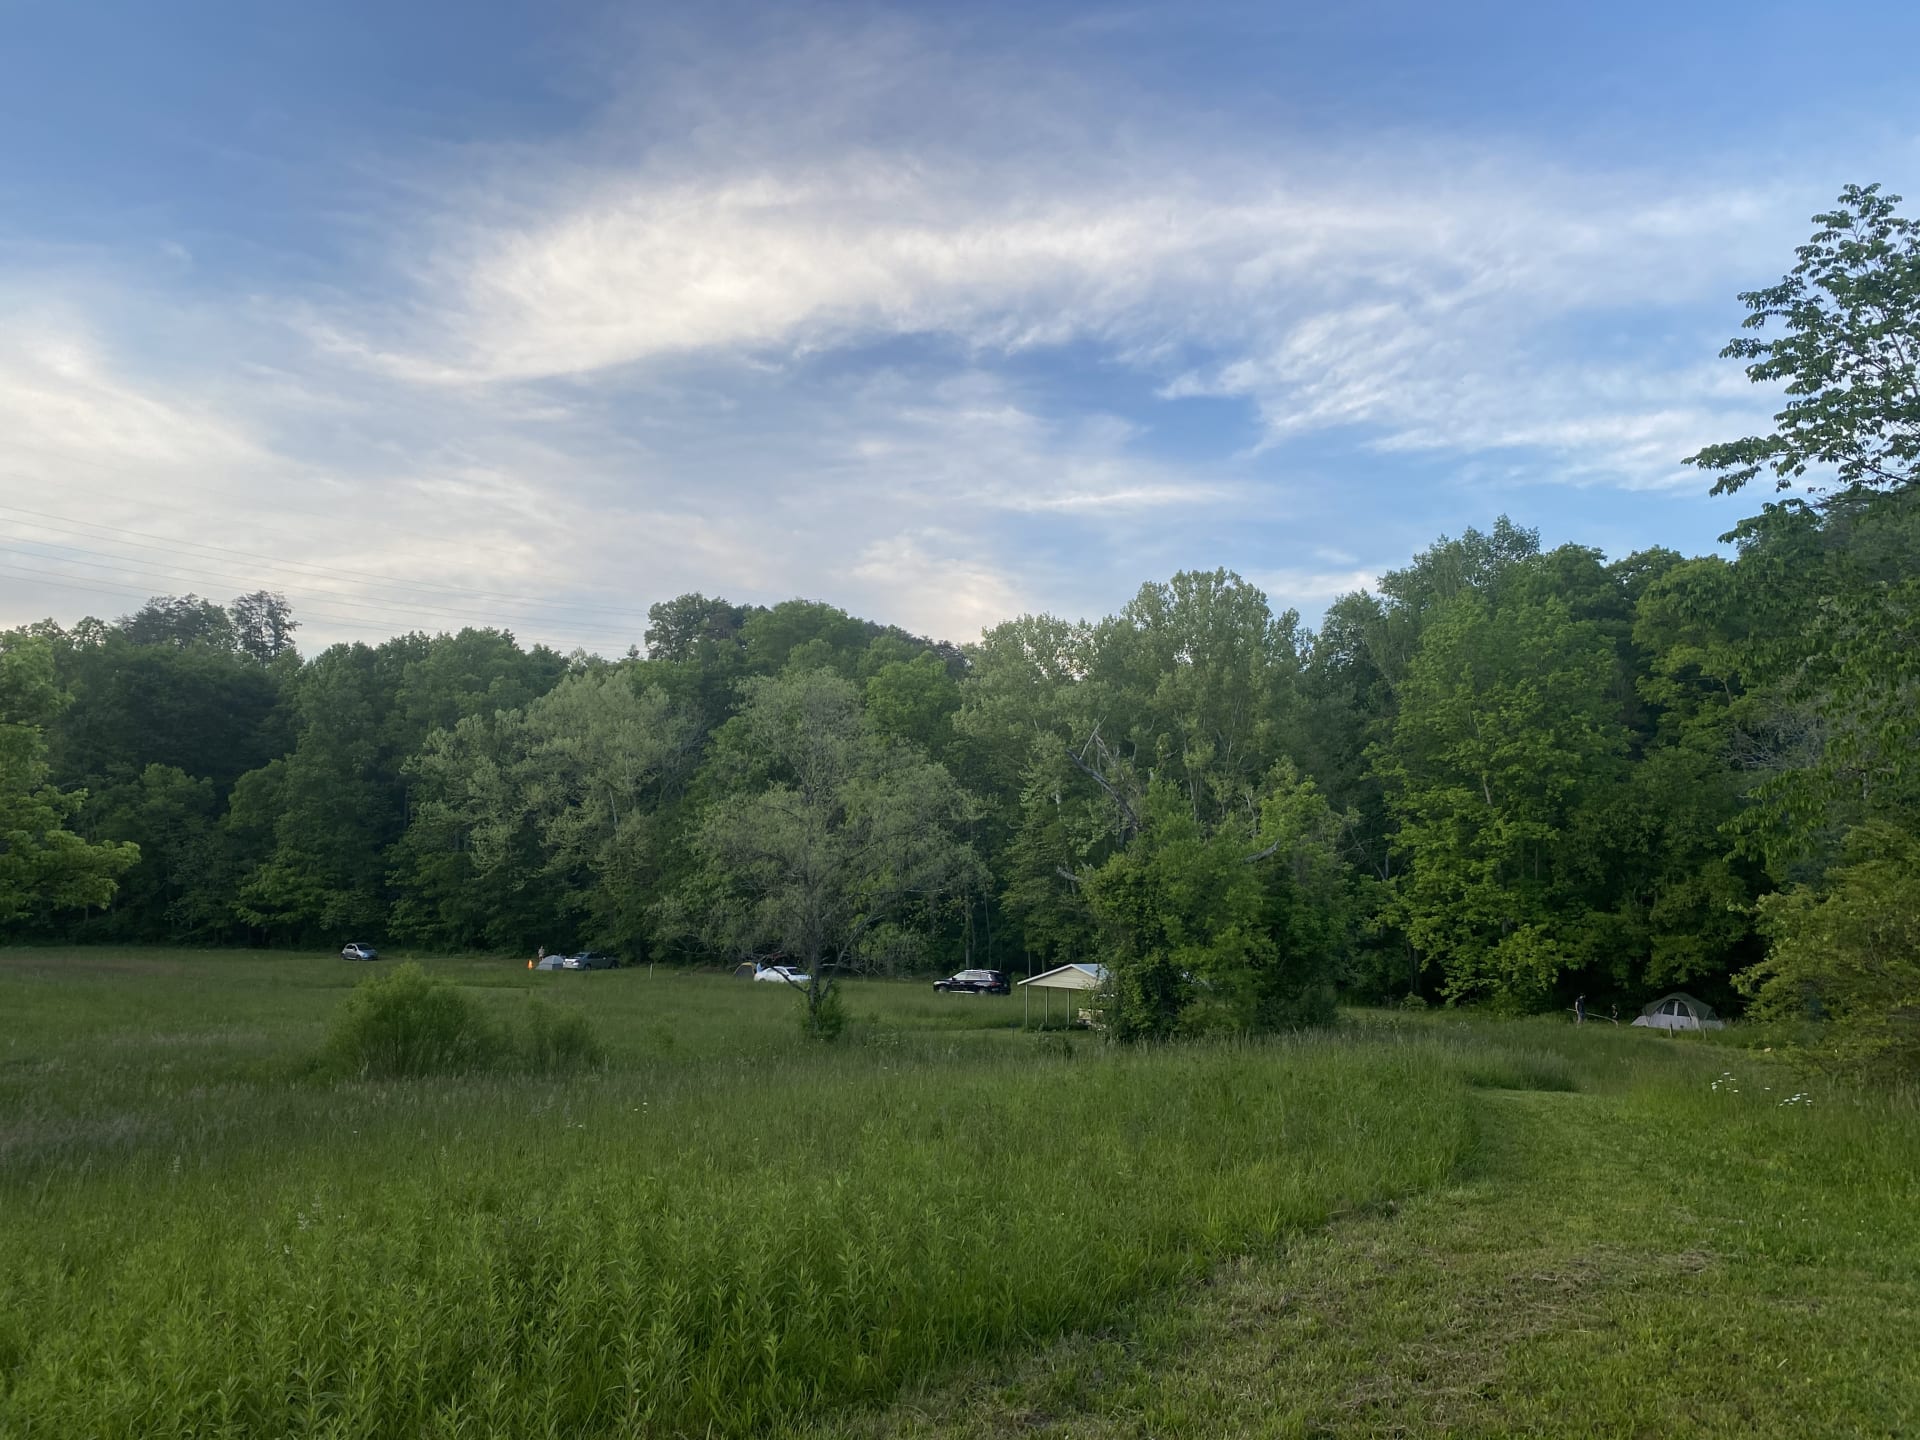 A view of the meadow and the creekside spots in the tree line.